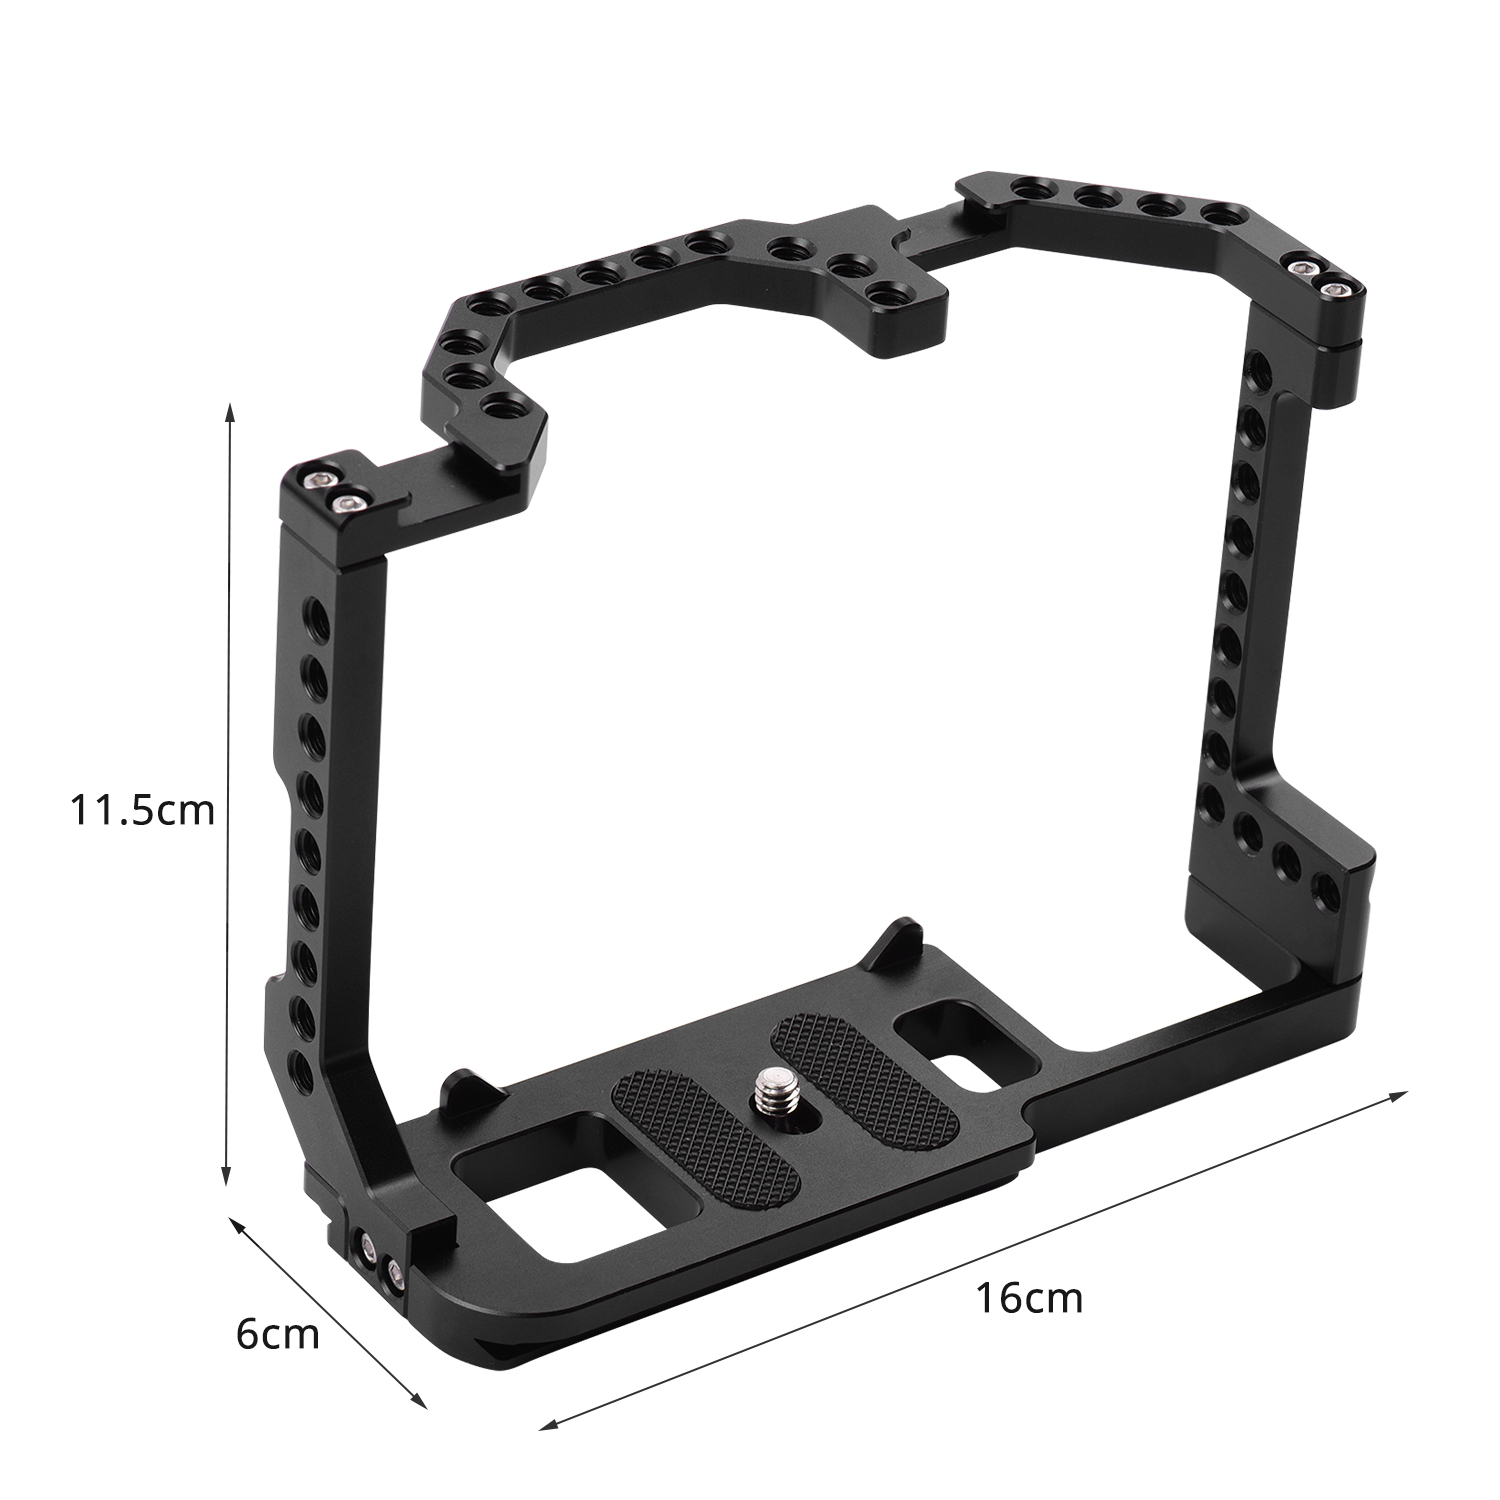 Andoer Camera Cage Aluminum Alloy with Dual Cold Shoe Mount 1/4 Inch Screw Compatible with Canon EOS 90D/80D/70D DSLR Camera